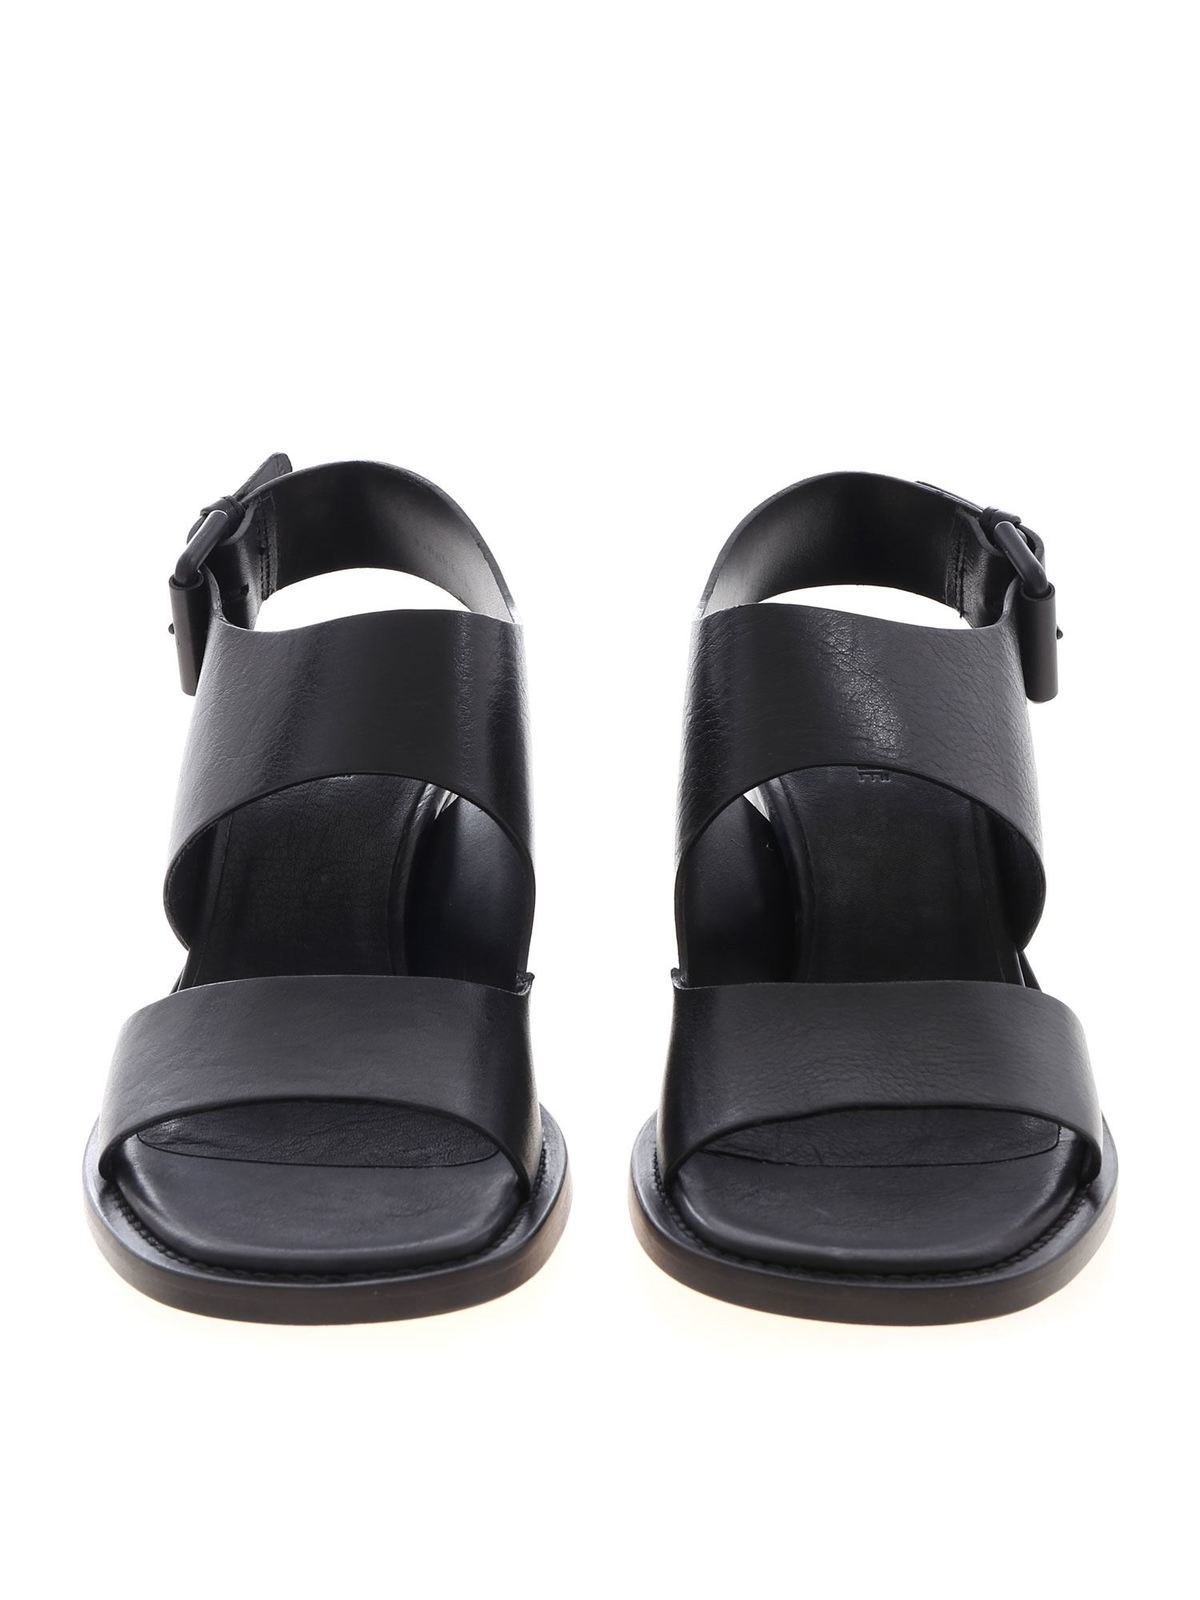 Sandals Vic Matiè - Sandals in black with asymmetrical bands ...